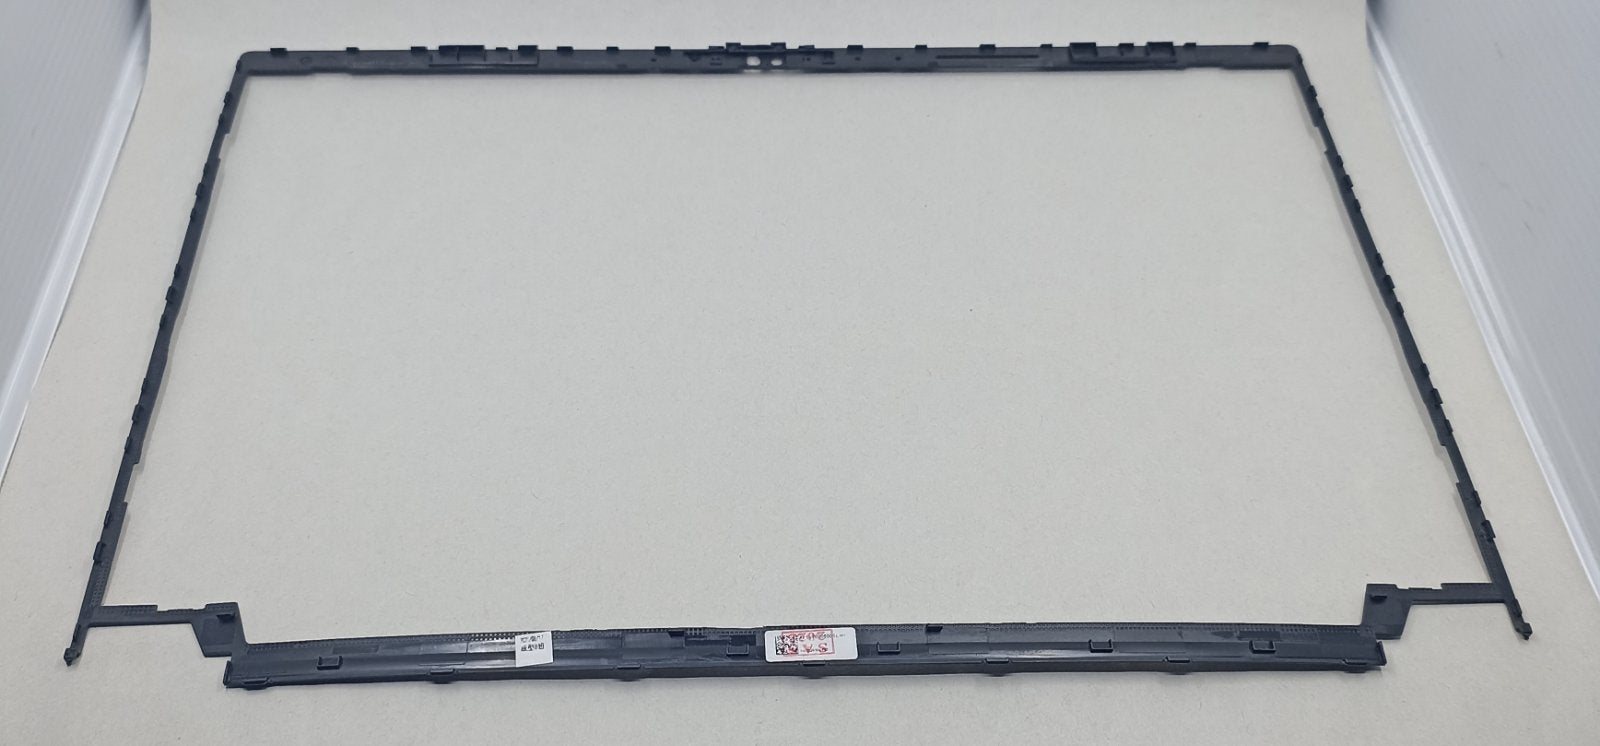 Replacement LCD Bezel for Lenovo T14s Gen 2 ThinkPad WL